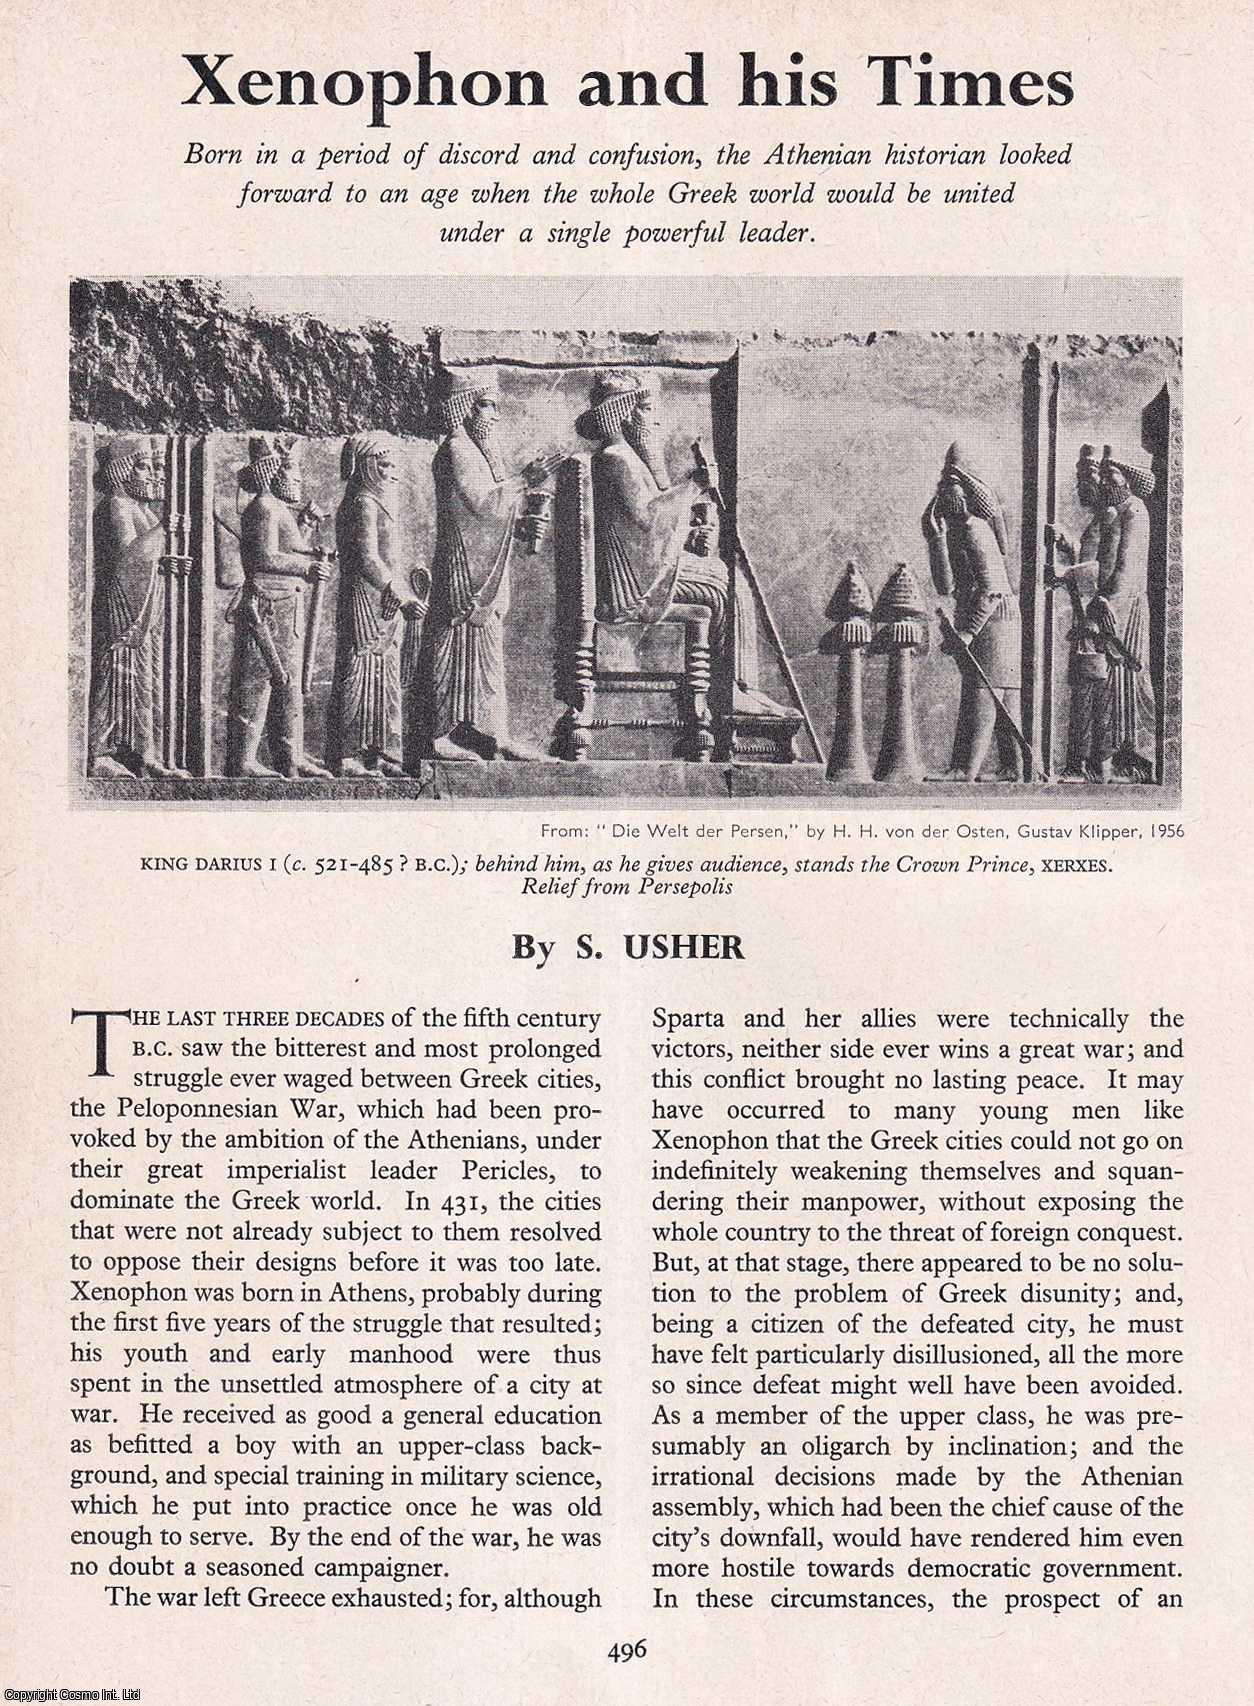 S. Usher - Xenophon and his Times. An original article from History Today magazine, 1962.